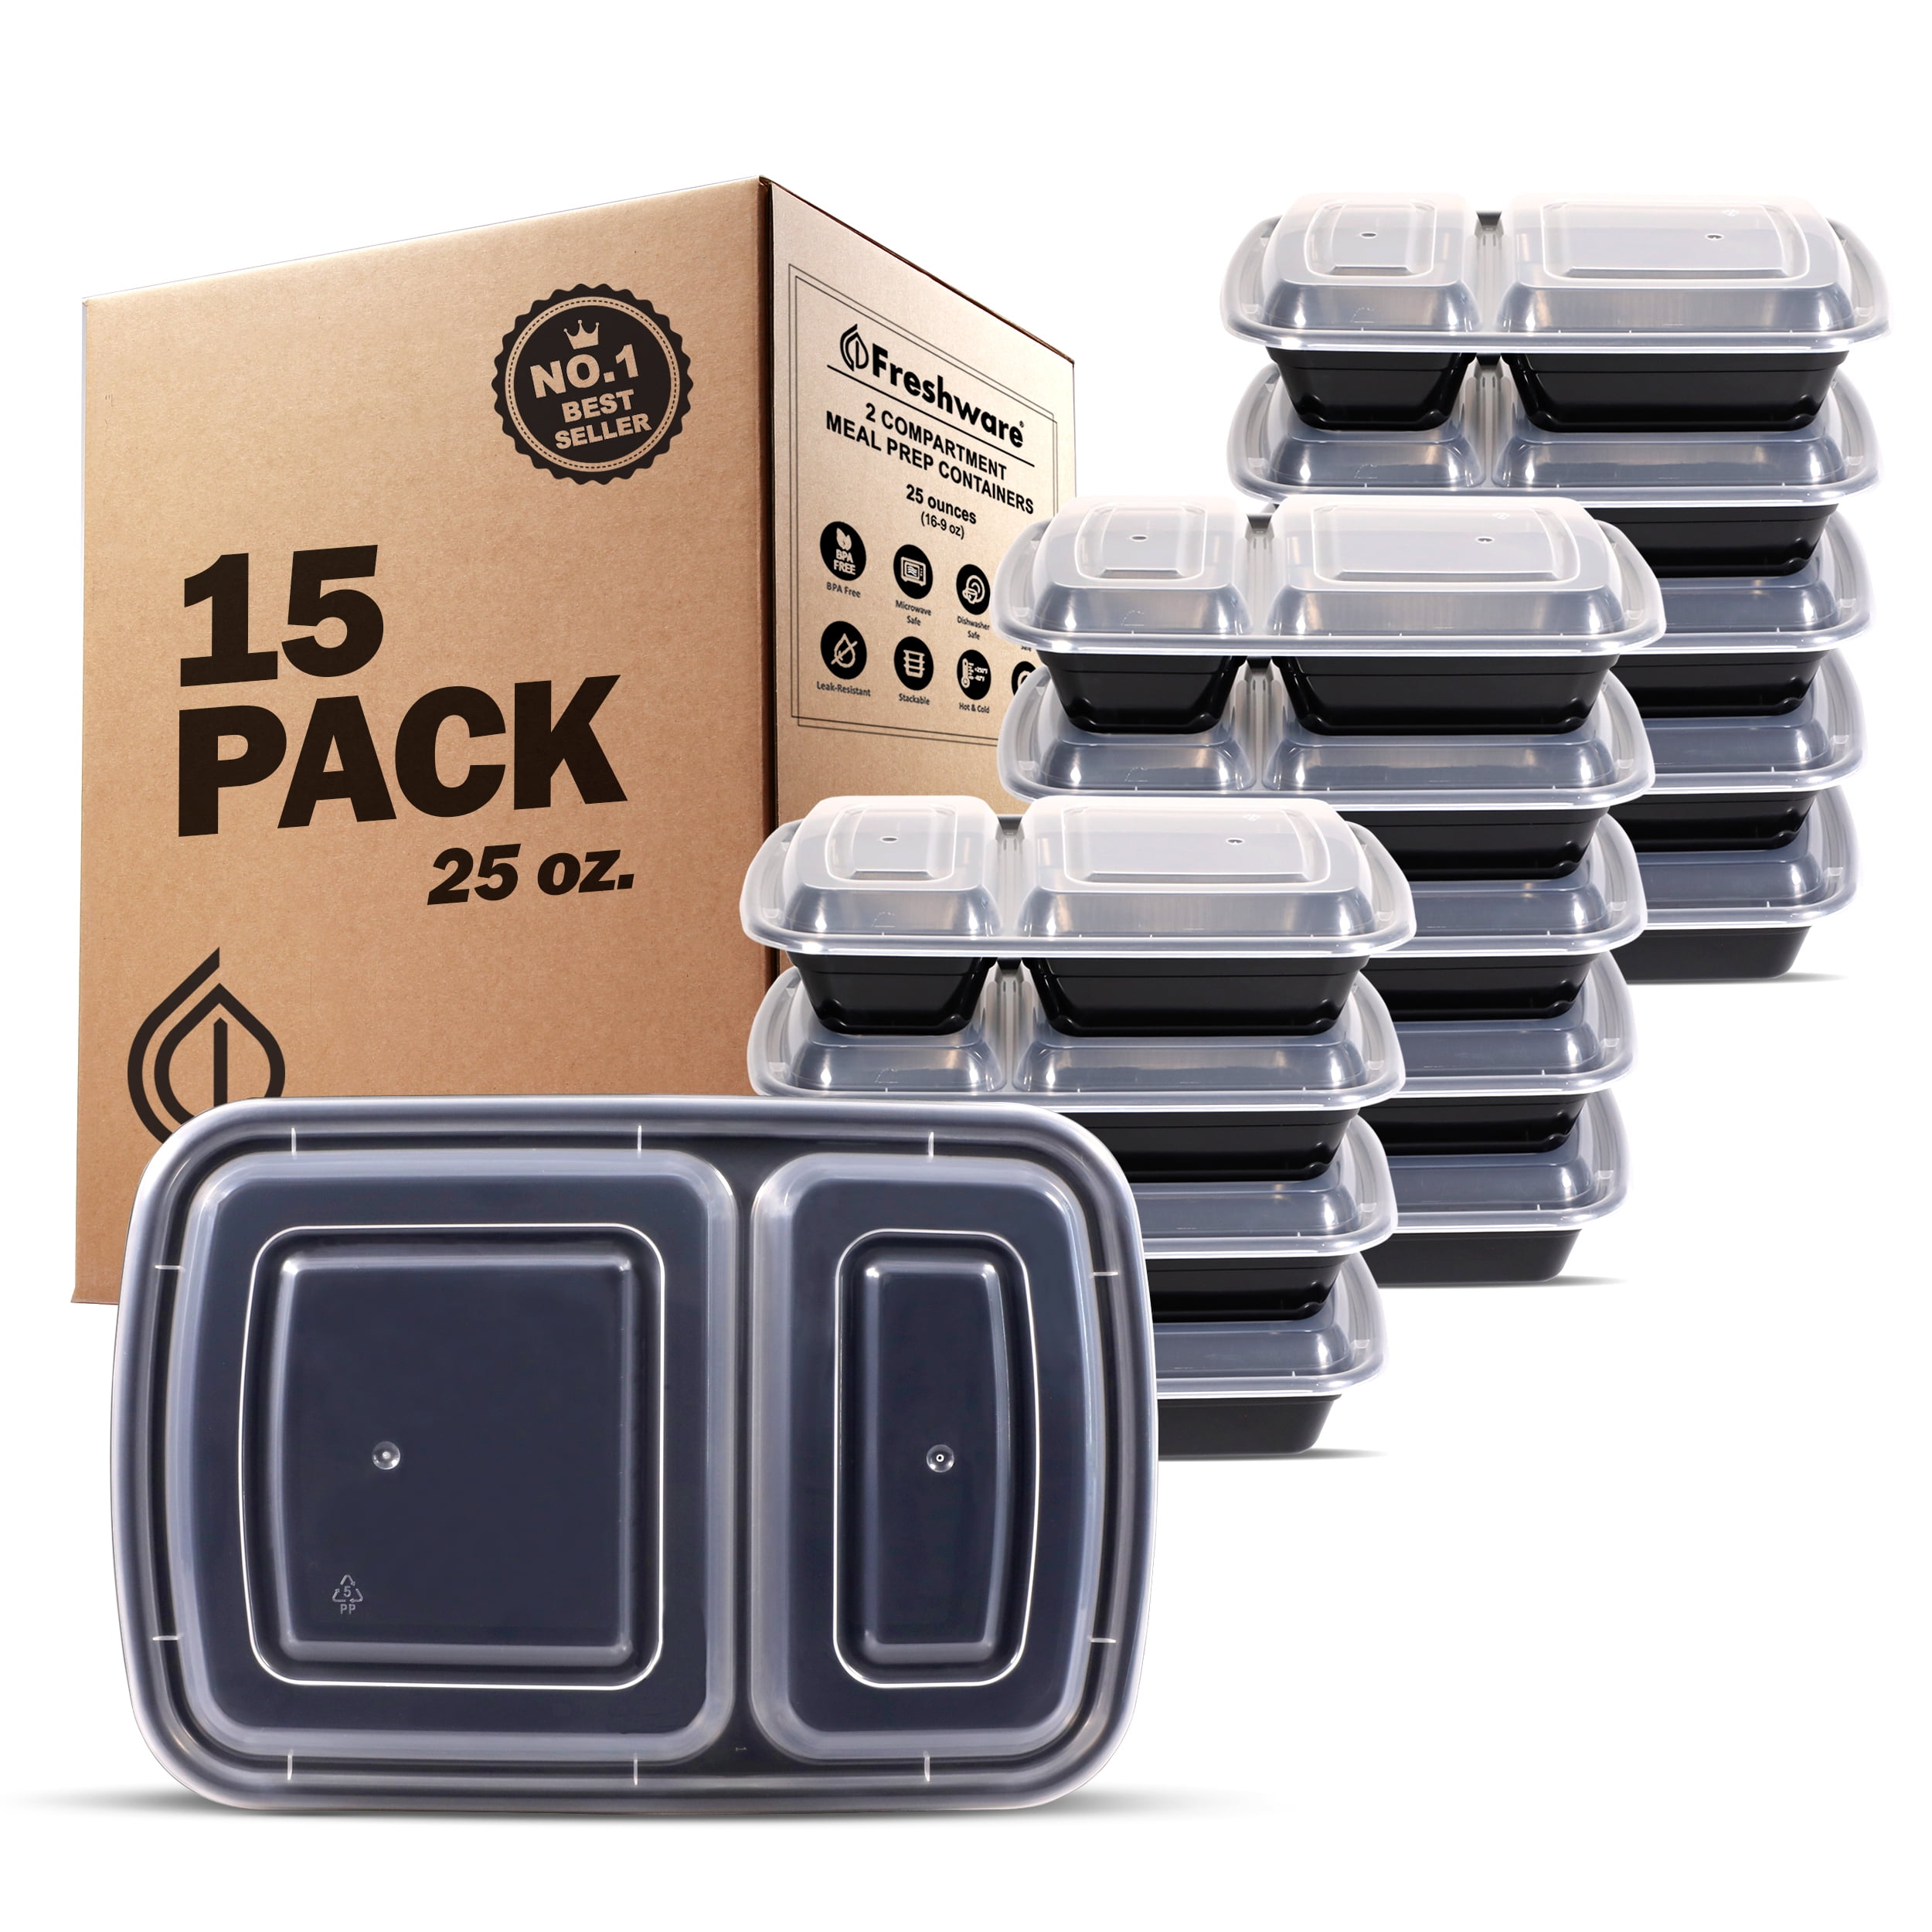 Lunchmeats launch in reusable PP containers